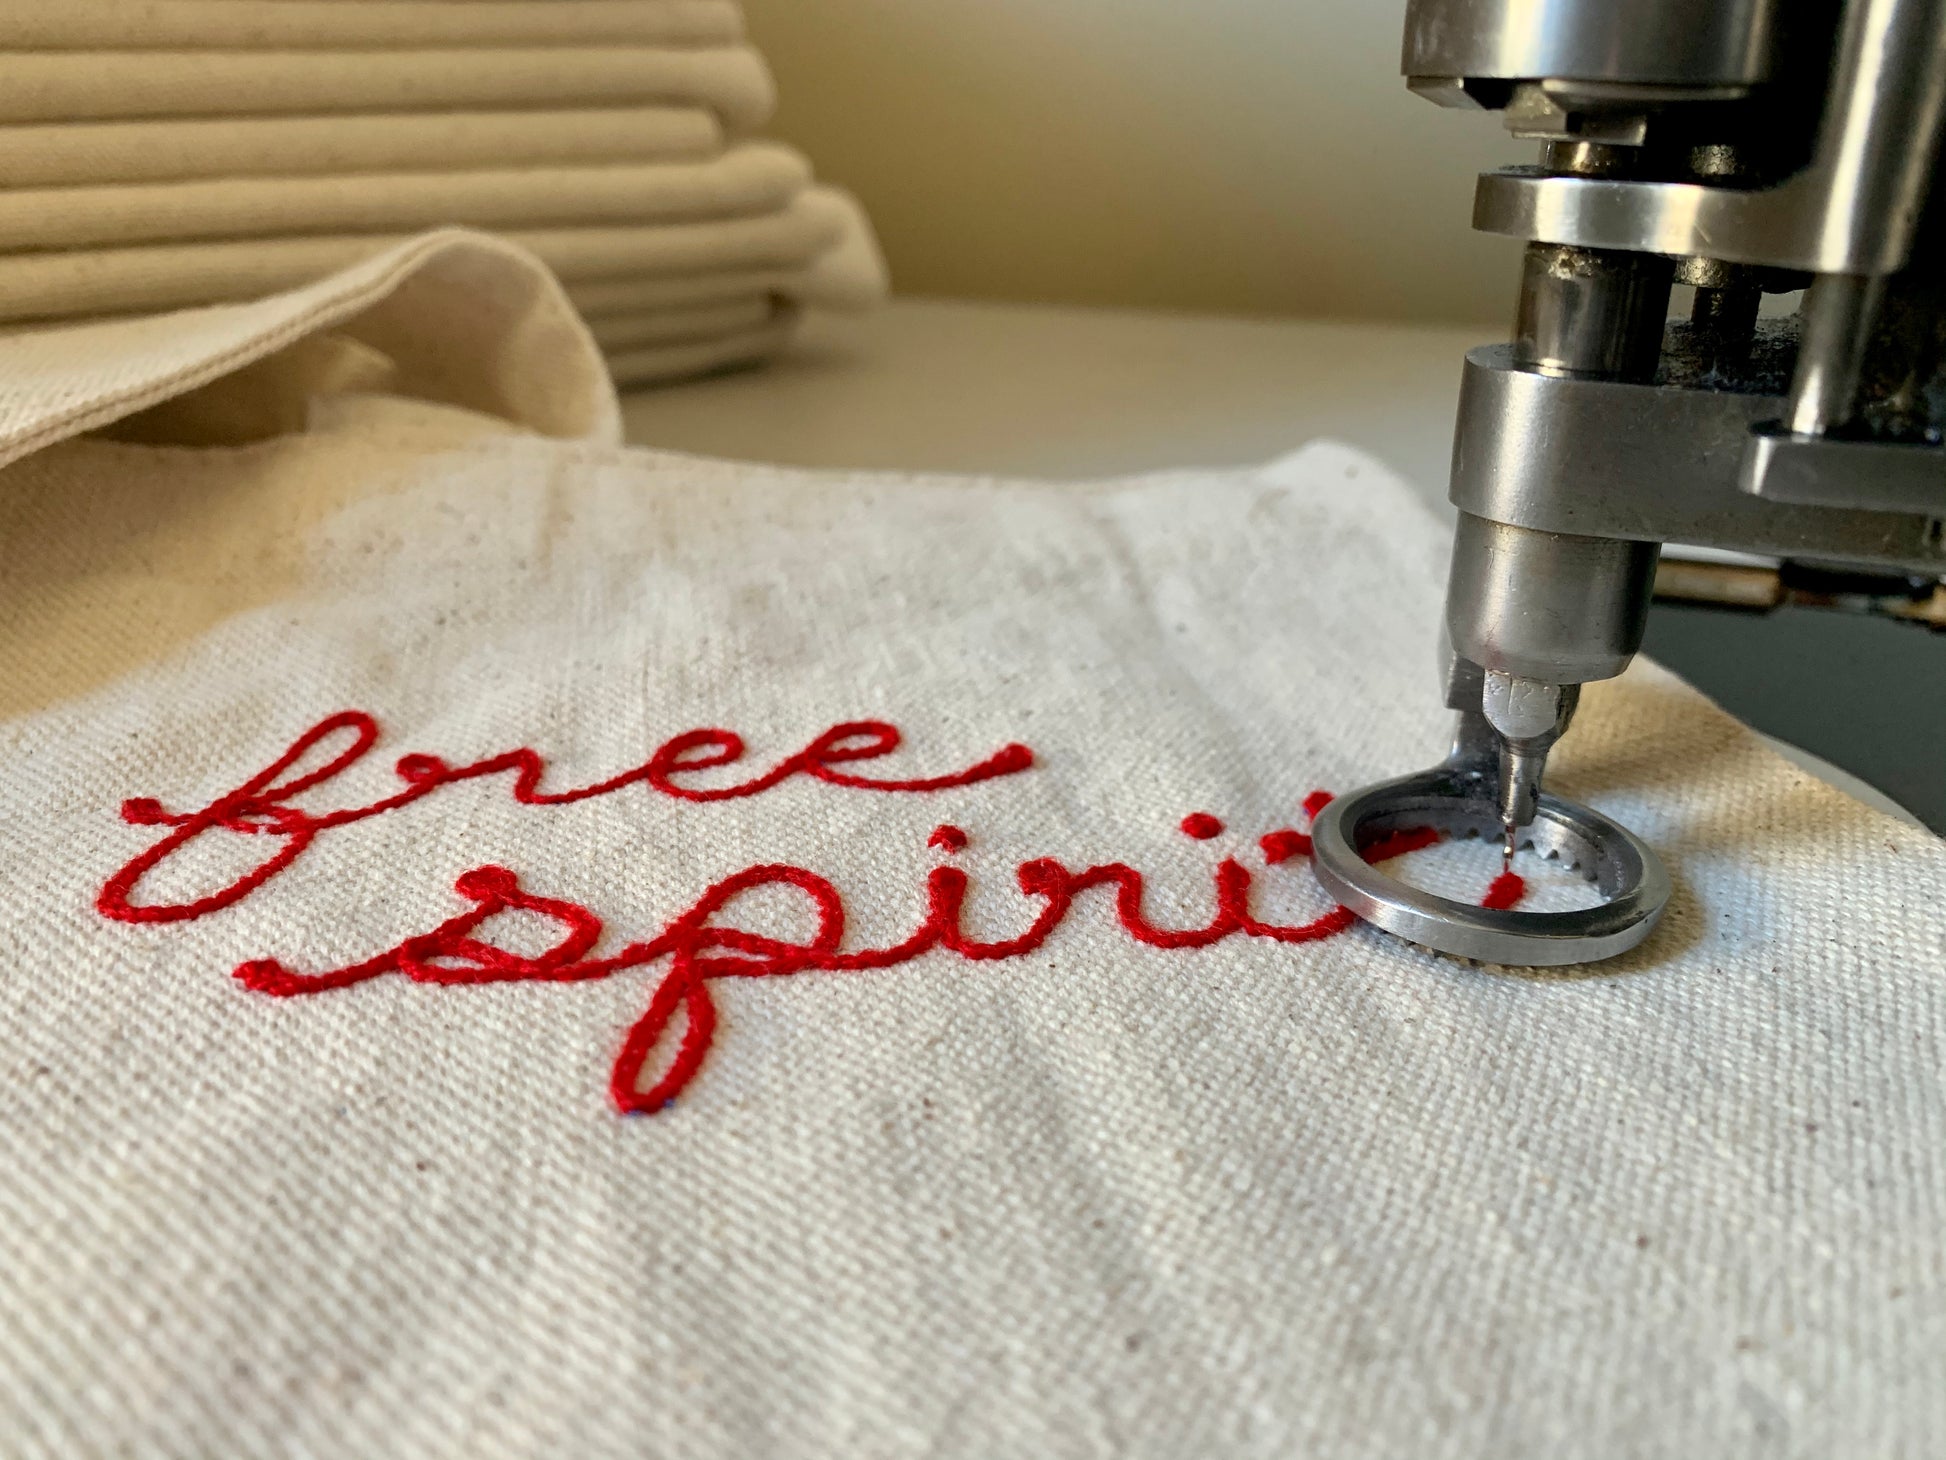 Canvas tote bag with free spirit in red lettering  embroidered with custom chain stitch embroidery with a chainstitch machine